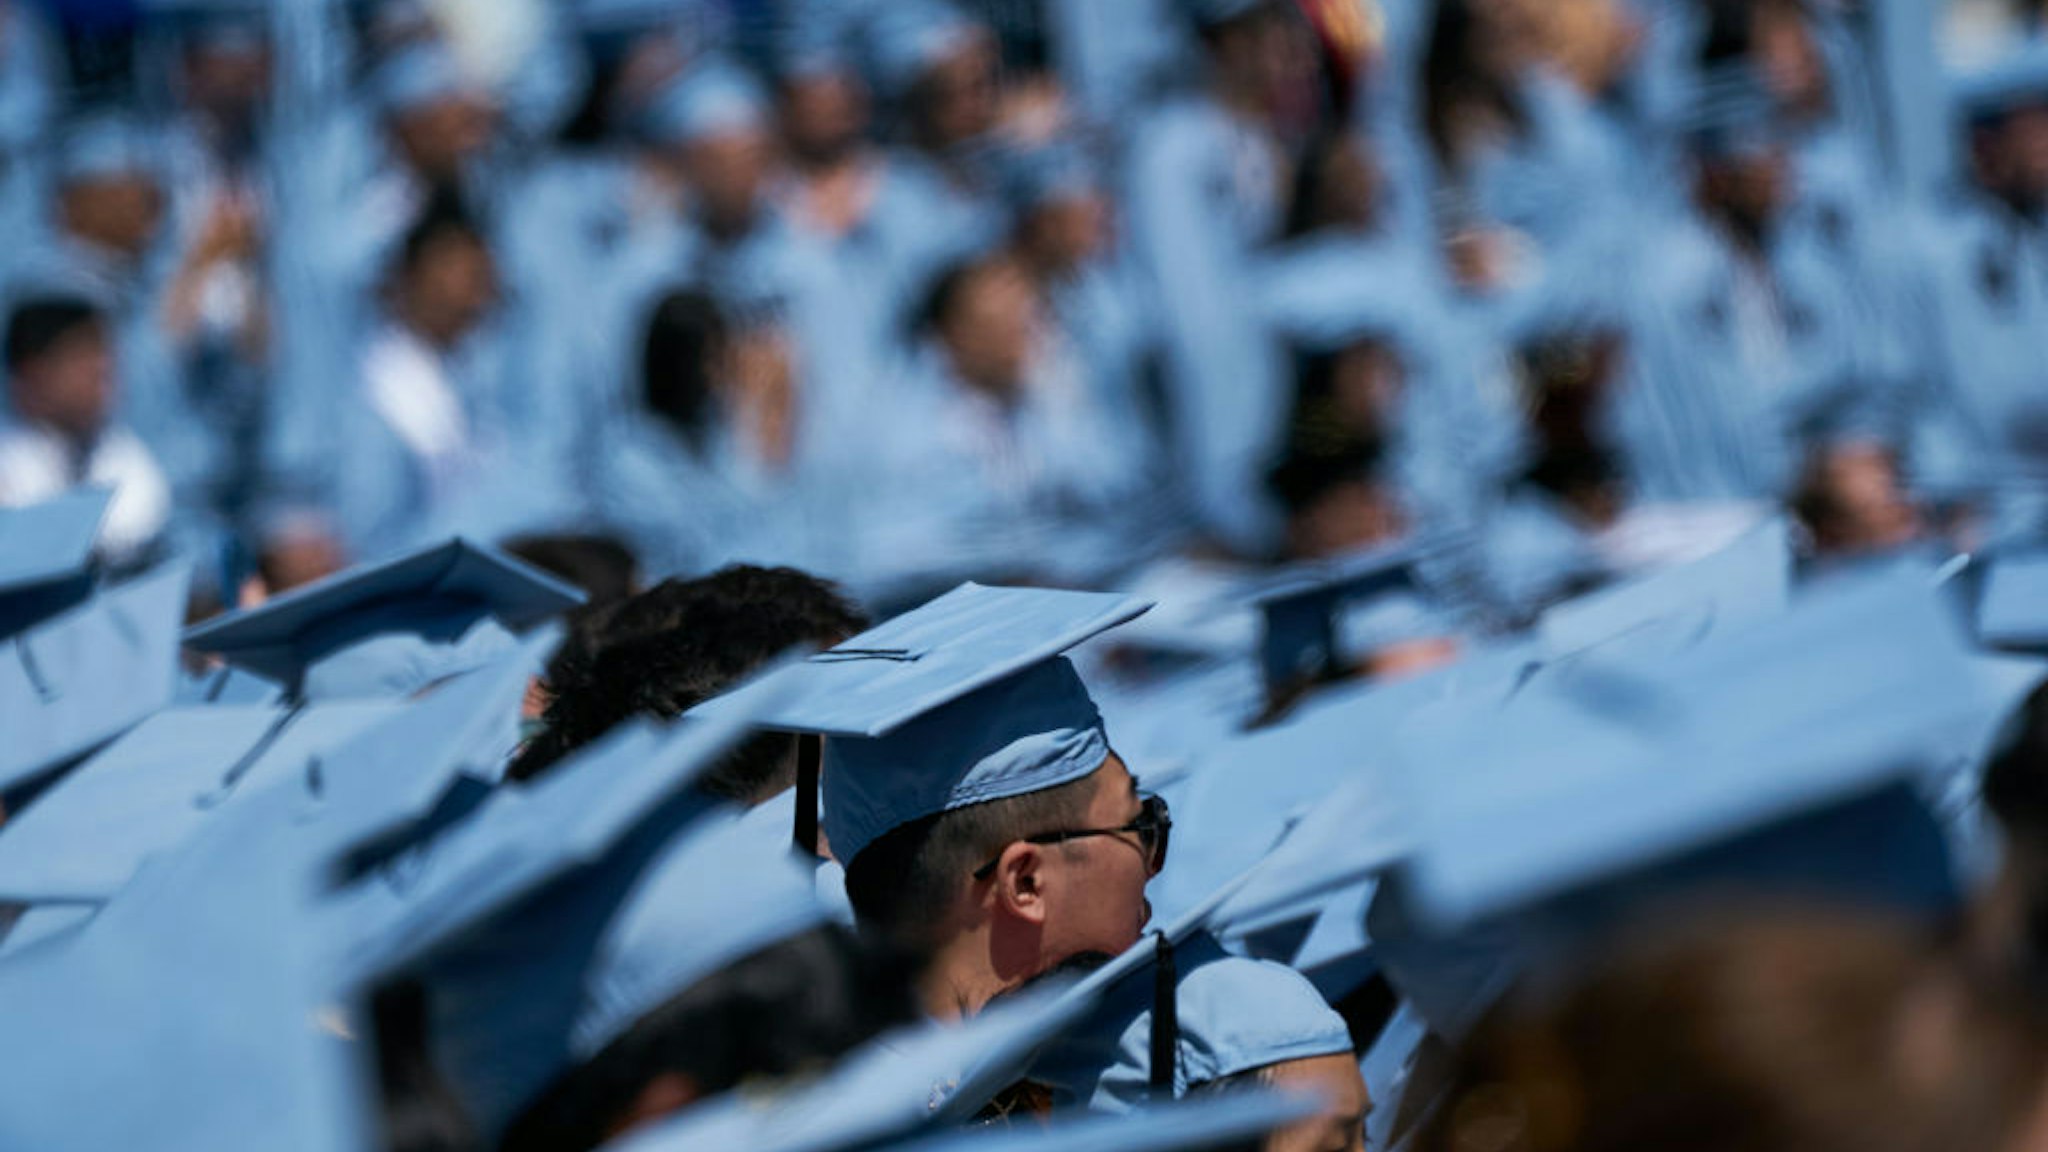 Graduates during the Columbia University commencement convocation in New York, US, on Wednesday, May 17, 2023. The university offers undergraduate and graduate degrees in arts and sciences, business, dentistry, education, engineering, law, medicine, nursing, pharmacy, and social work. Photographer: Bing Guan/Bloomberg via Getty Images